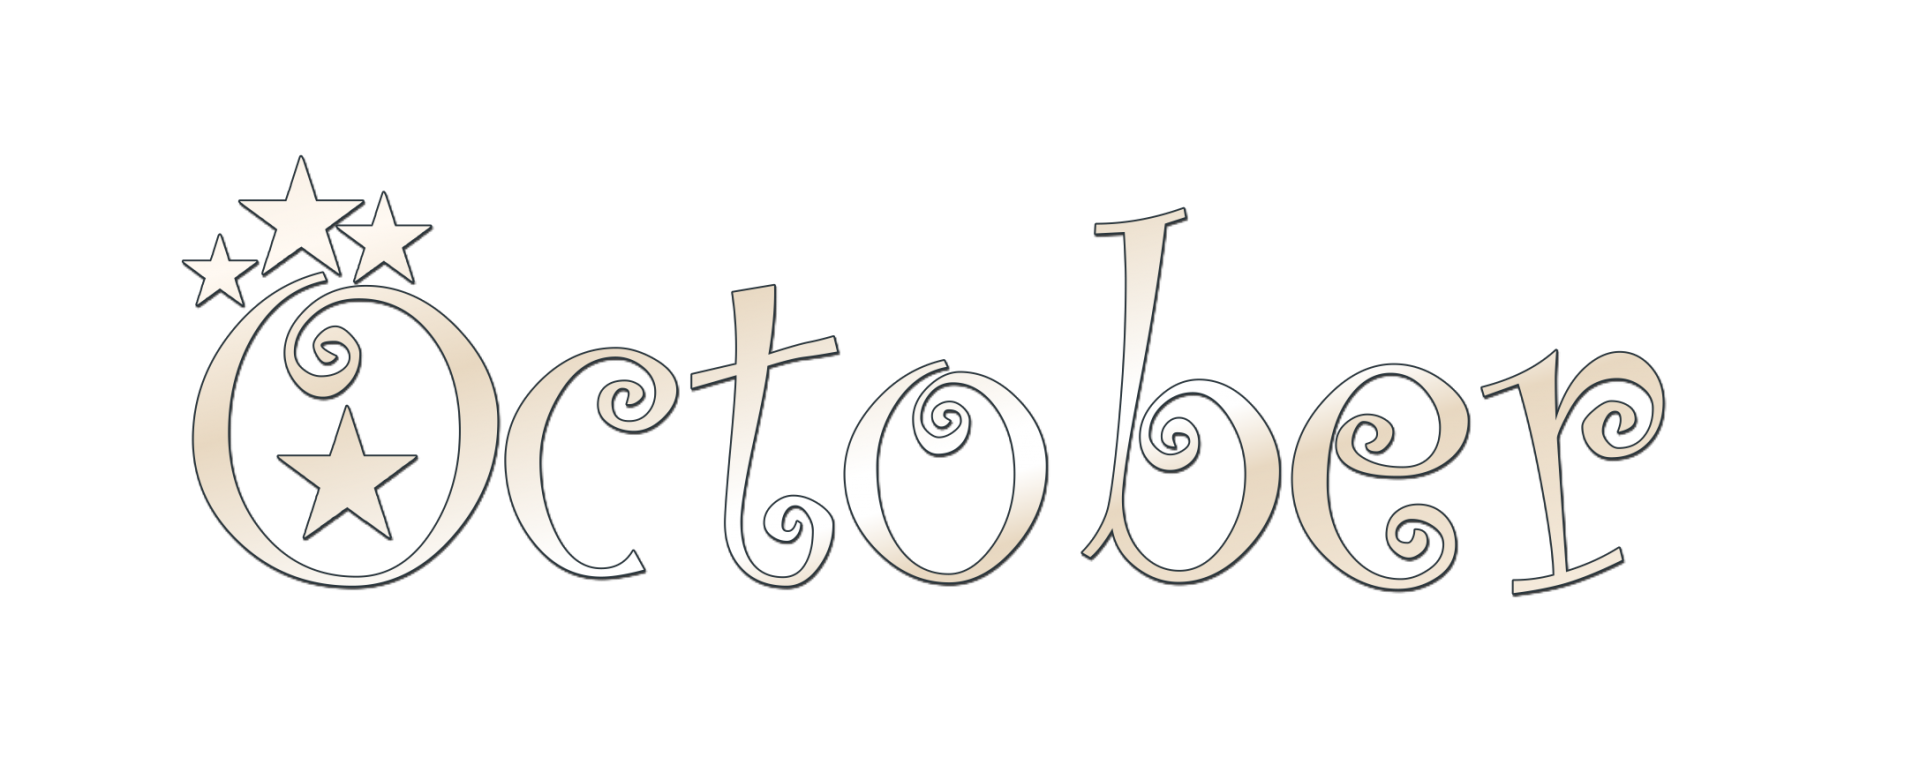 october word clipart black and white